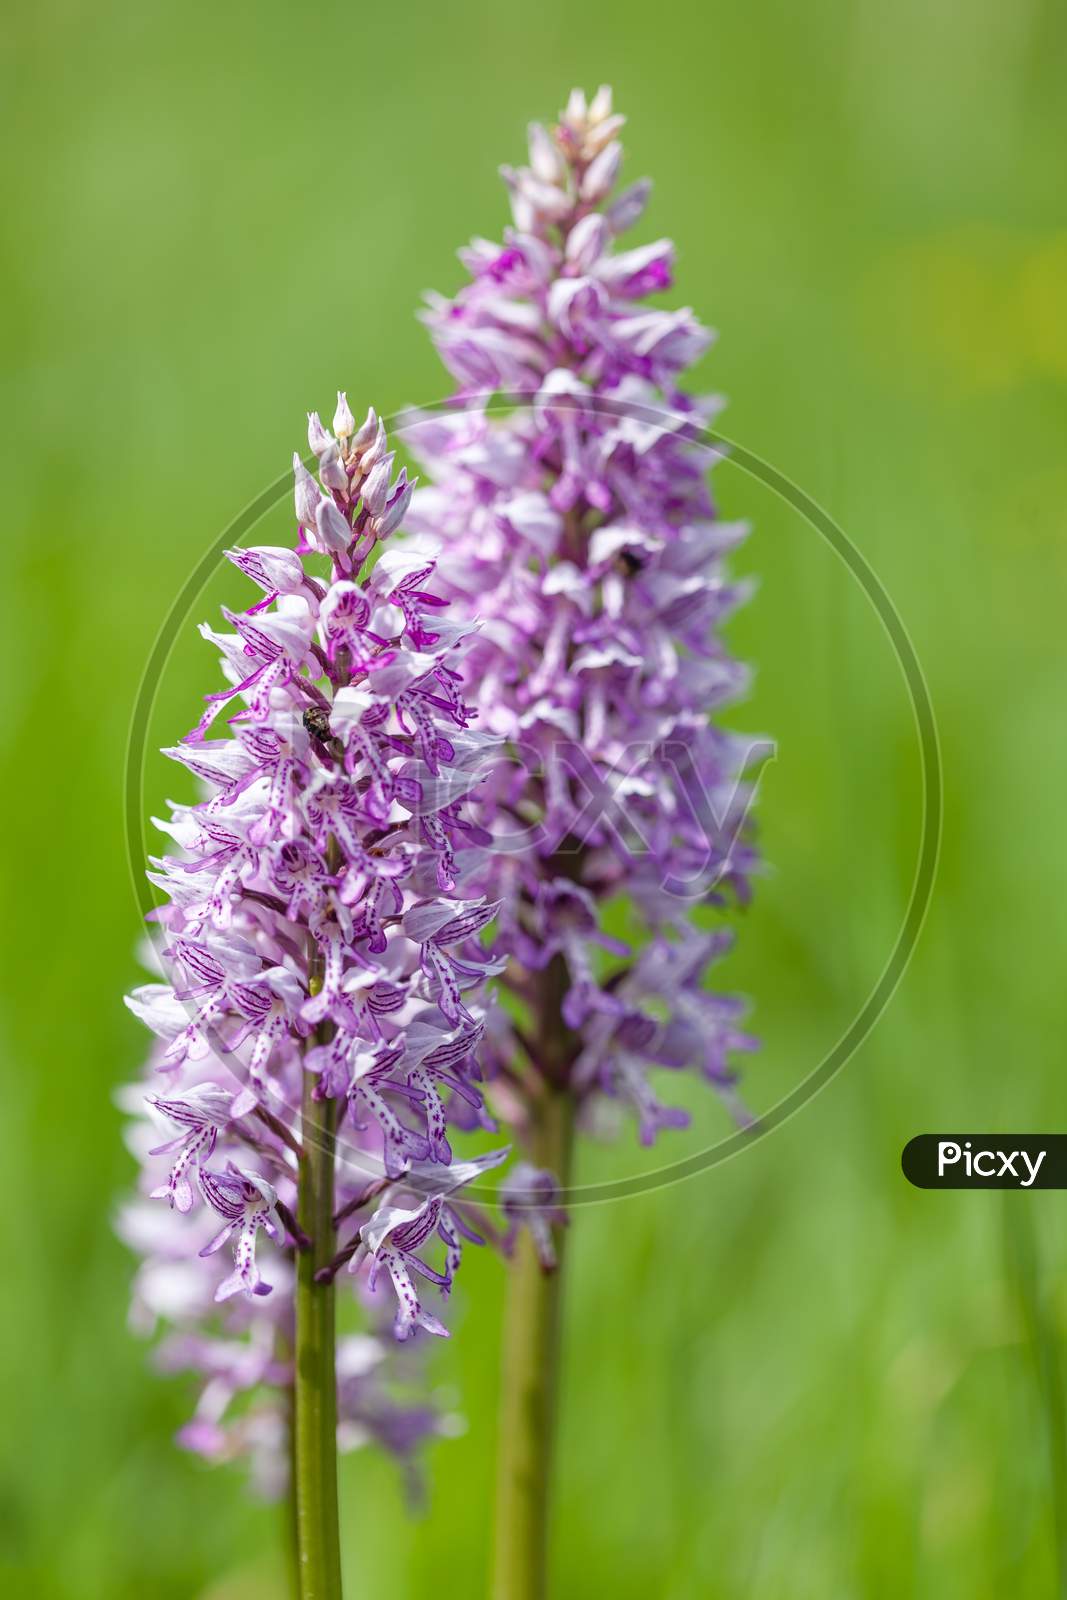 A Closeup Shot Of A Beautiful Southern Marsh-Orchid Under The Sunlight